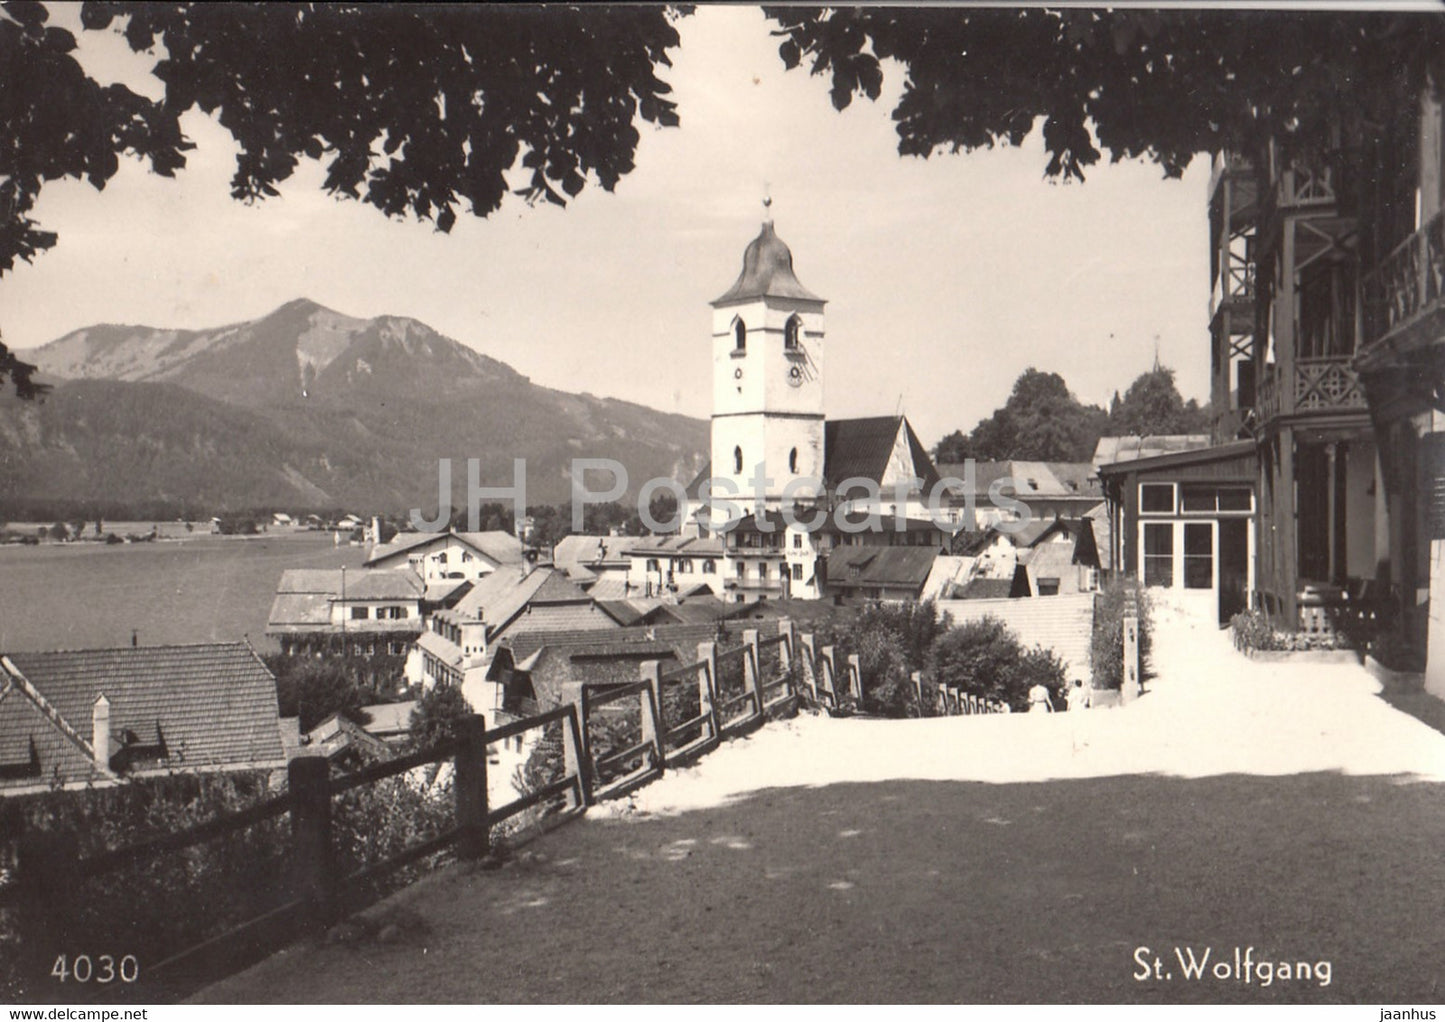 St Wolfgang - 4030 - old postcard - Austria - used - JH Postcards